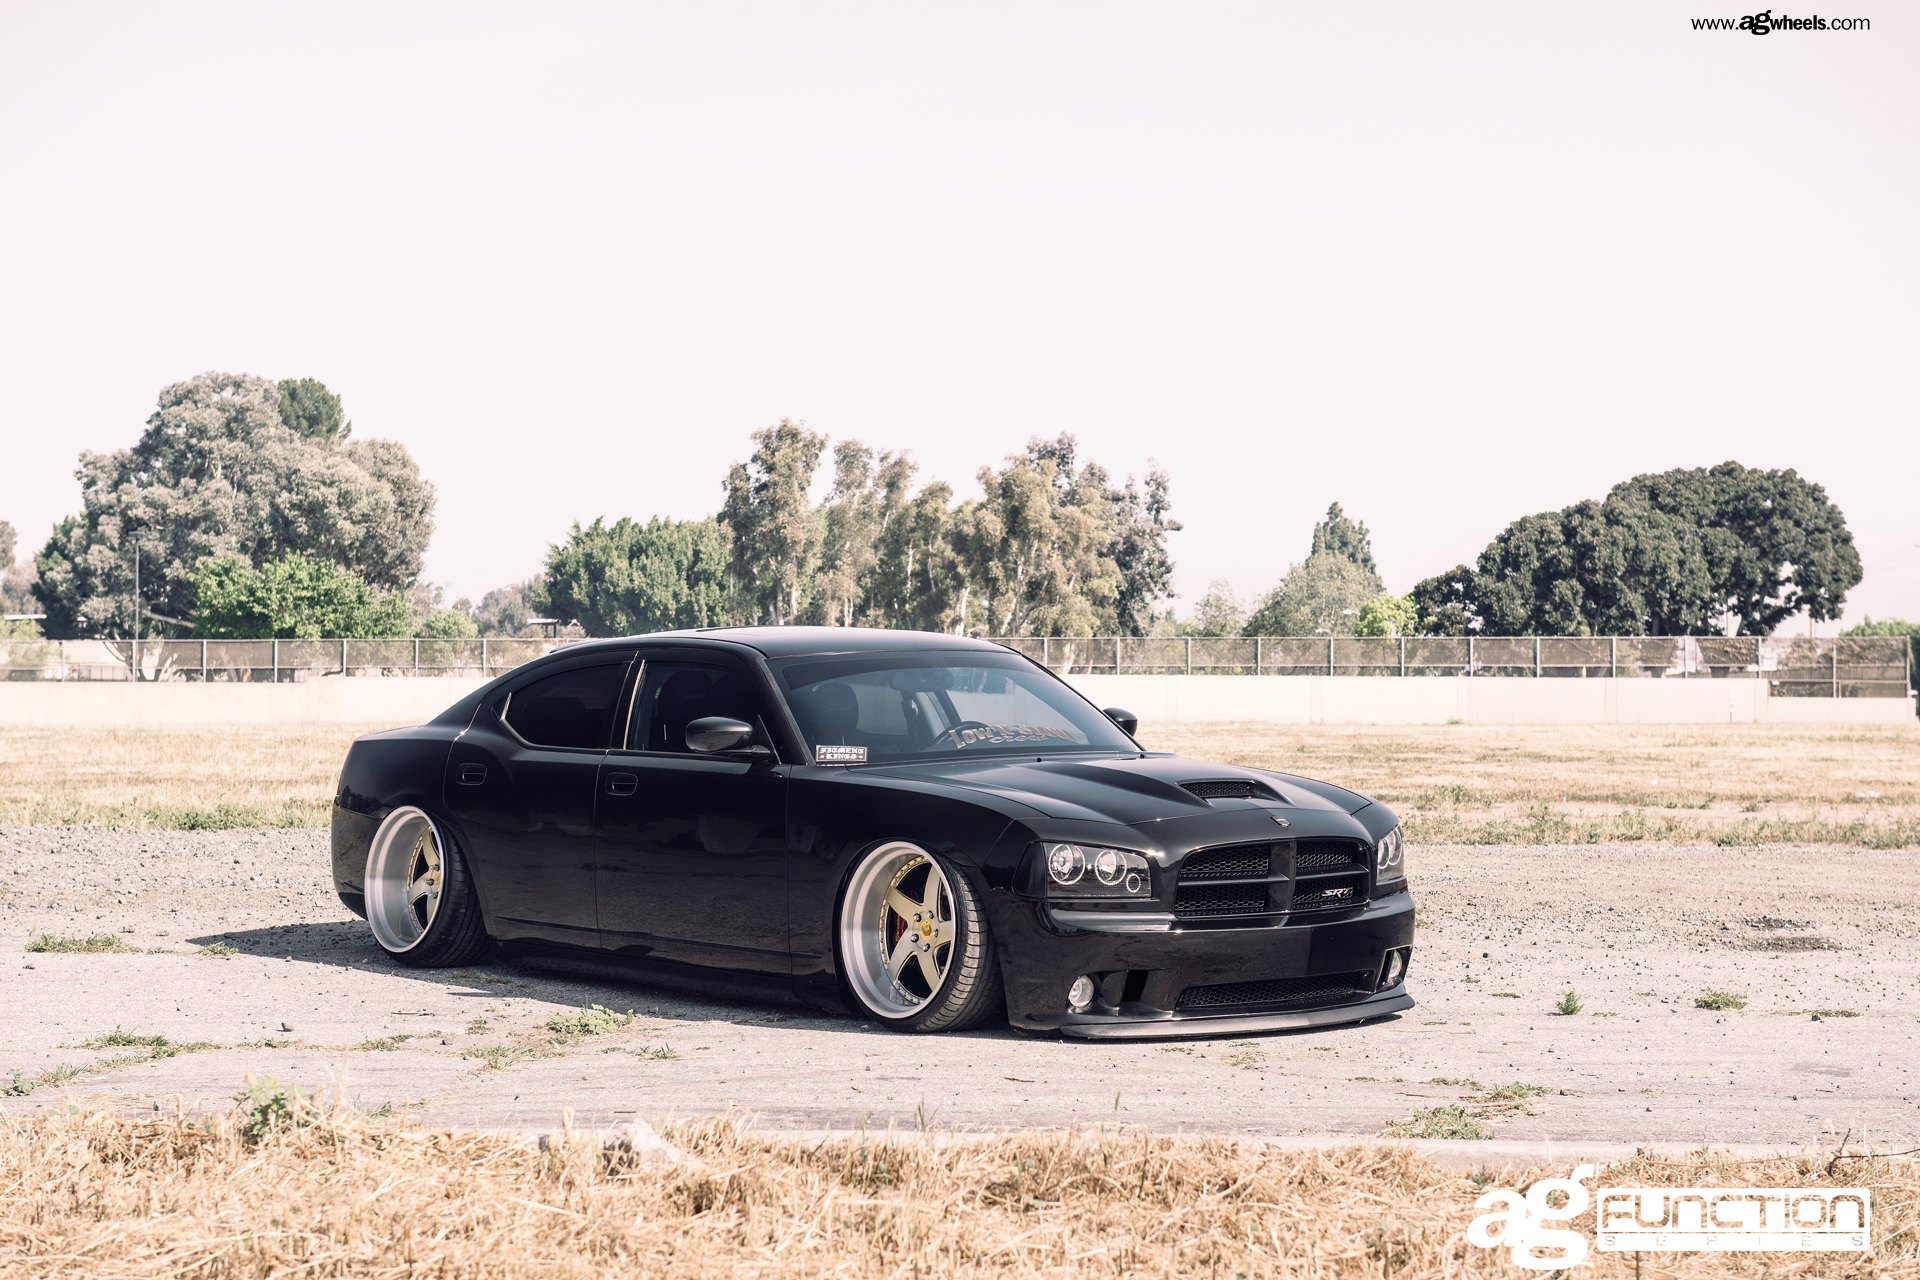 Stanced SRT Charger on Deep Dish Rims. dodge charger deep dish rims. 